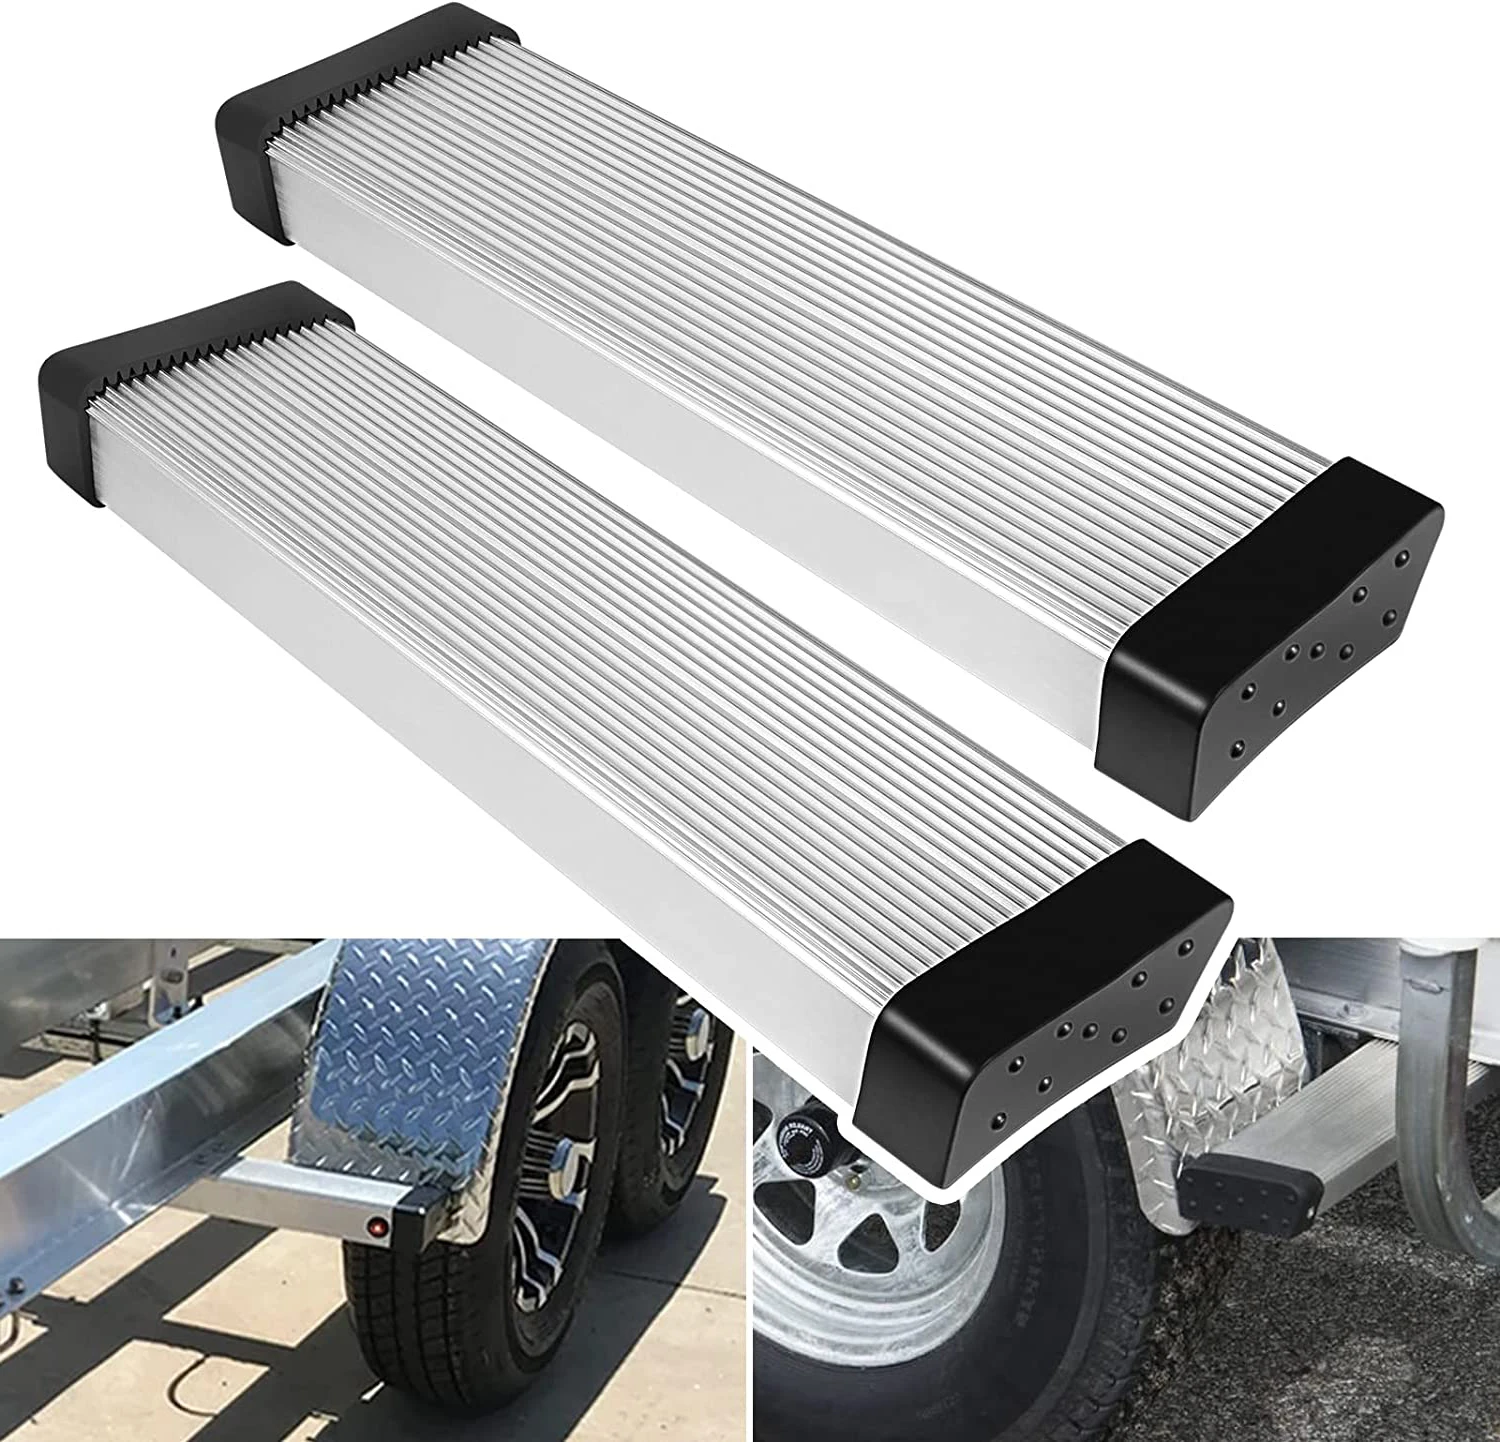 MX Boat Trailer Aluminum Fender Mounts Fit for Boat Trailer Round & Step Pad Bolt On Brackets Boat Accessories Marine